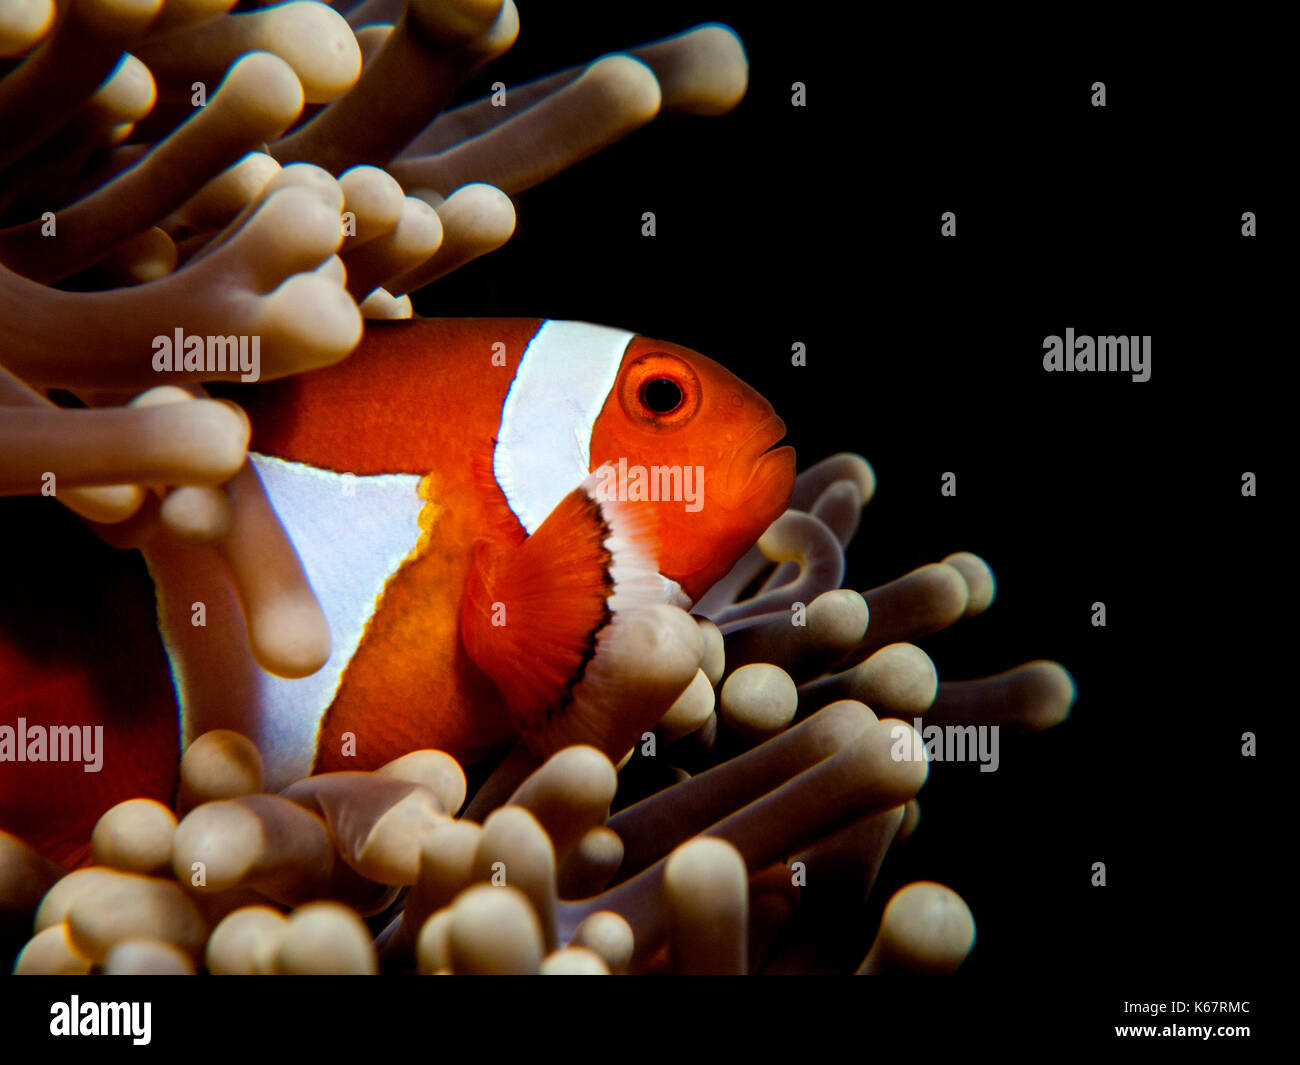 Clown anemone fish poking out of anemone Stock Photo